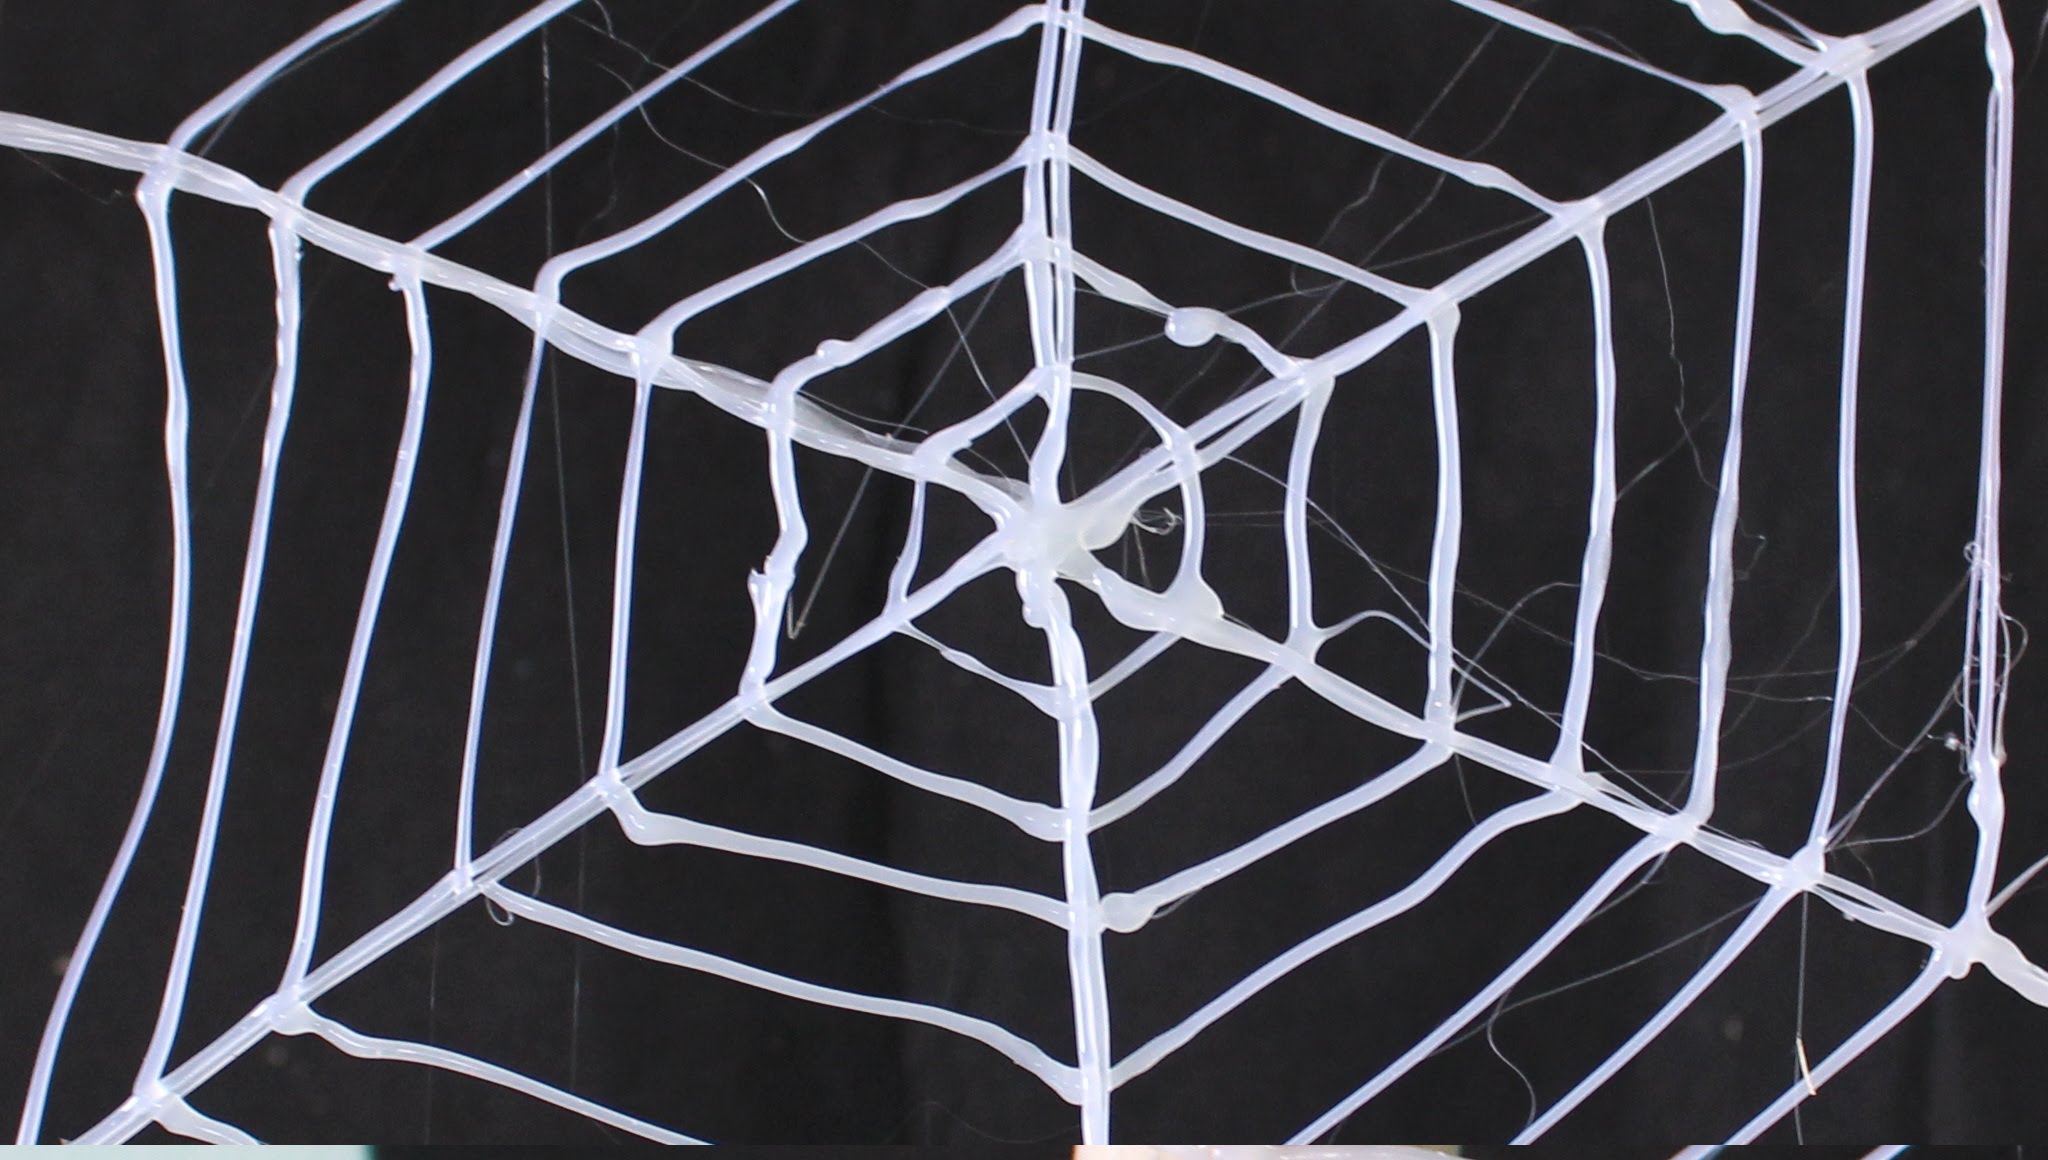 How to make a spider web using hot glue - YouTube